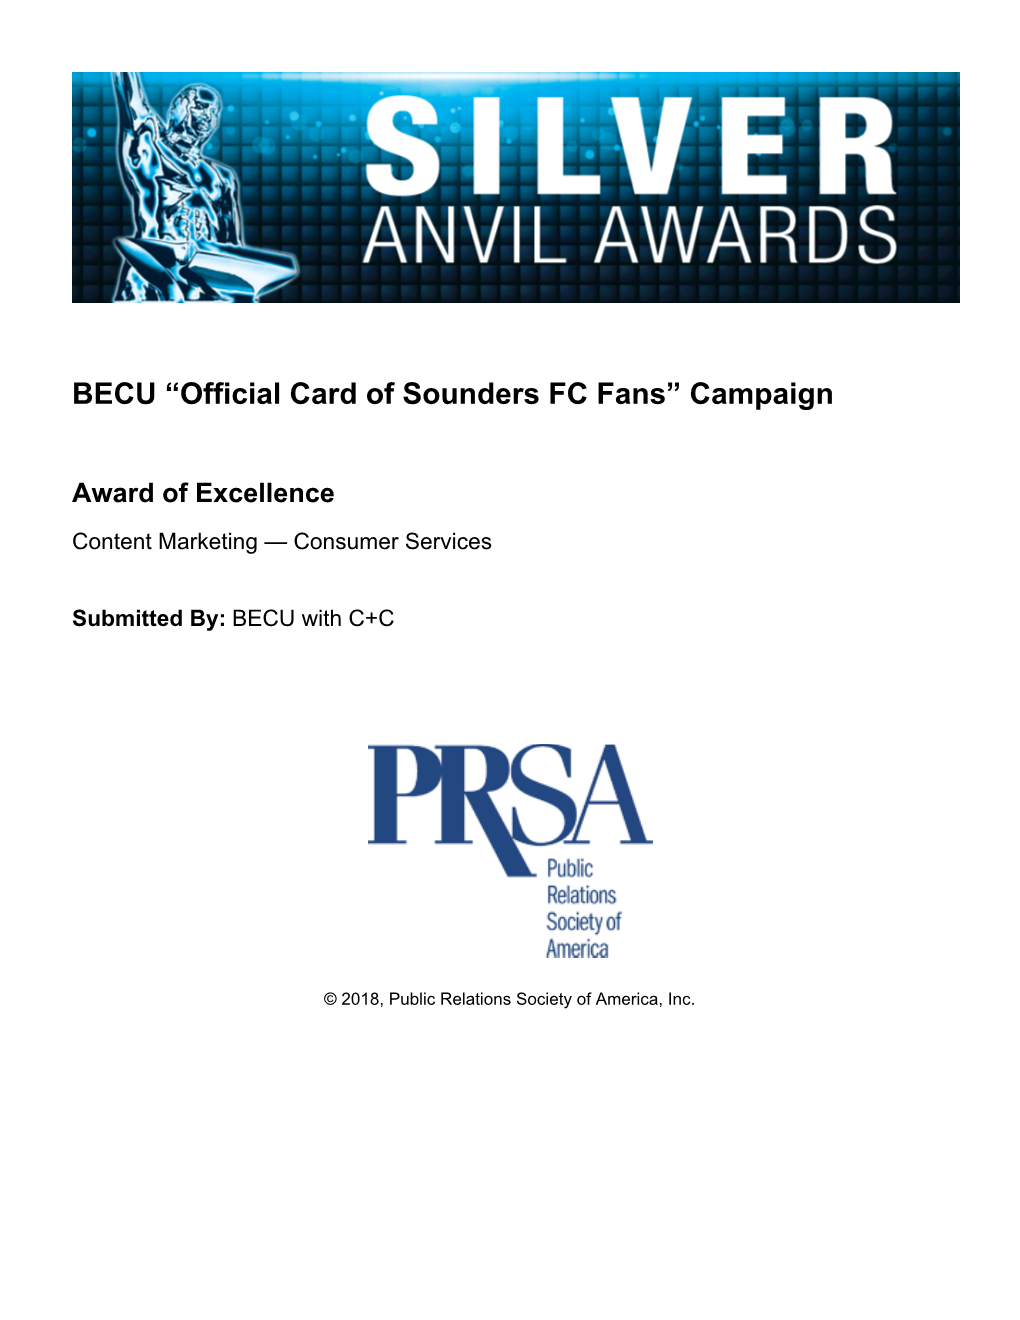 BECU “Official Card of Sounders FC Fans” Campaign